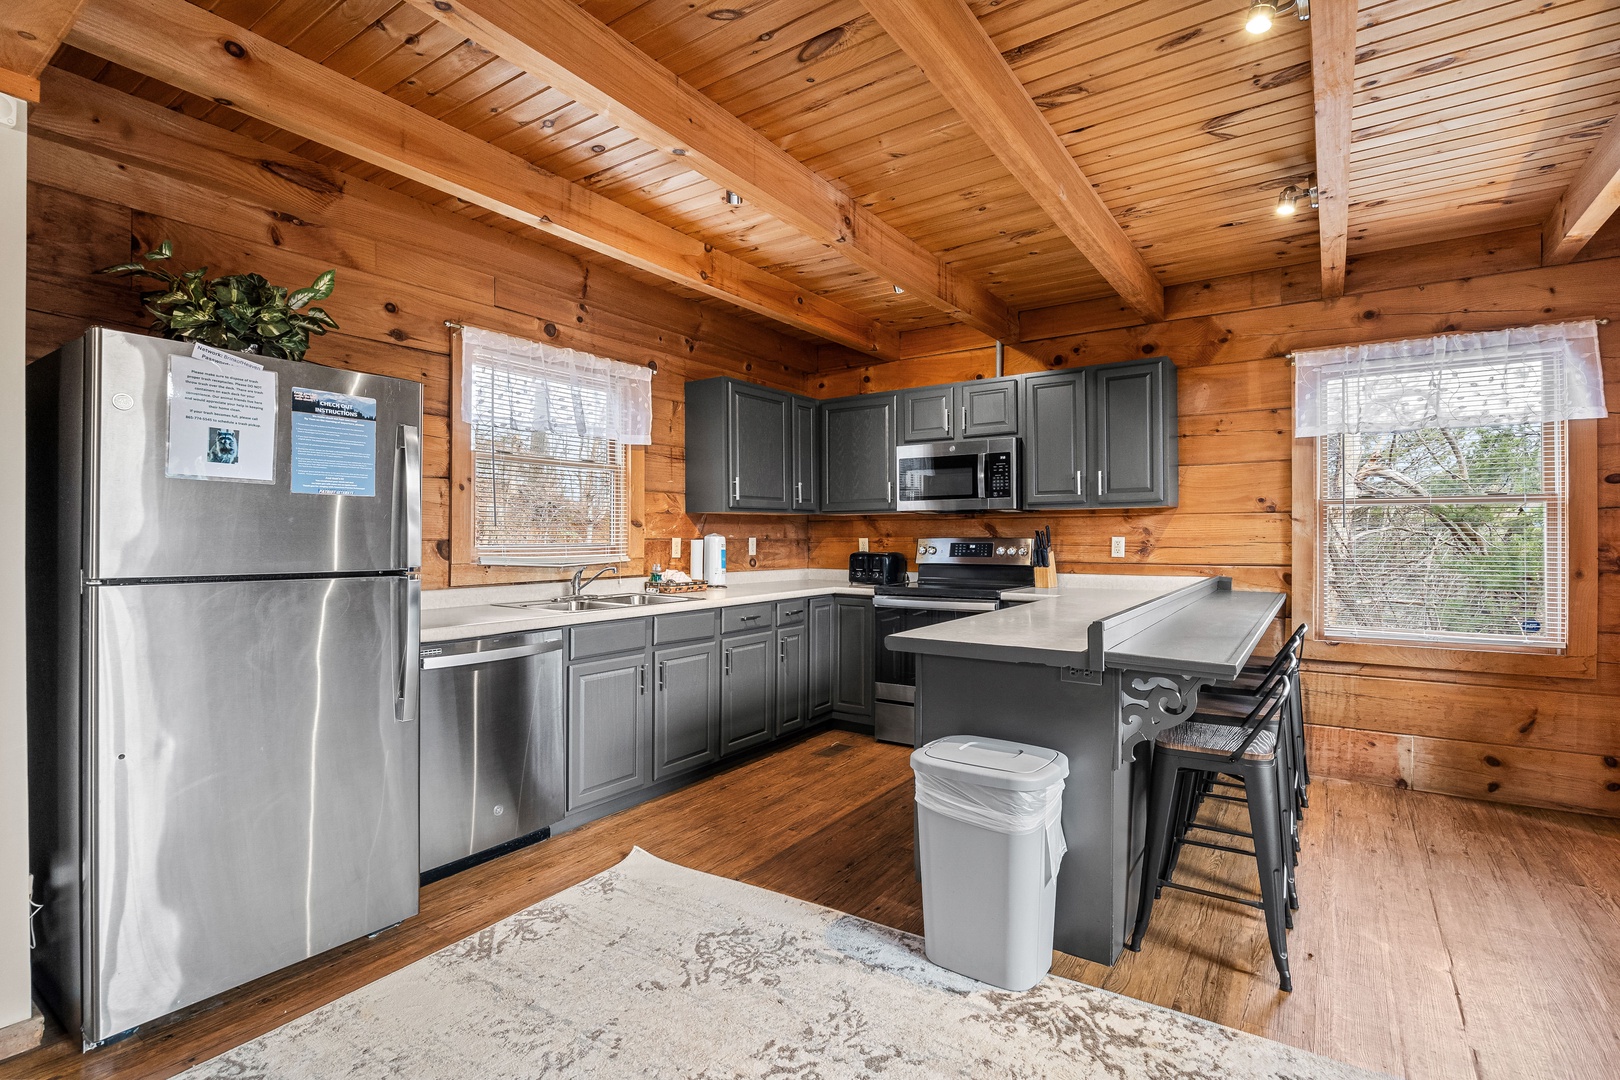 Breakfast bar and appliances at Brink of Heaven, a 2 bedroom cabin rental located in Gatlinburg